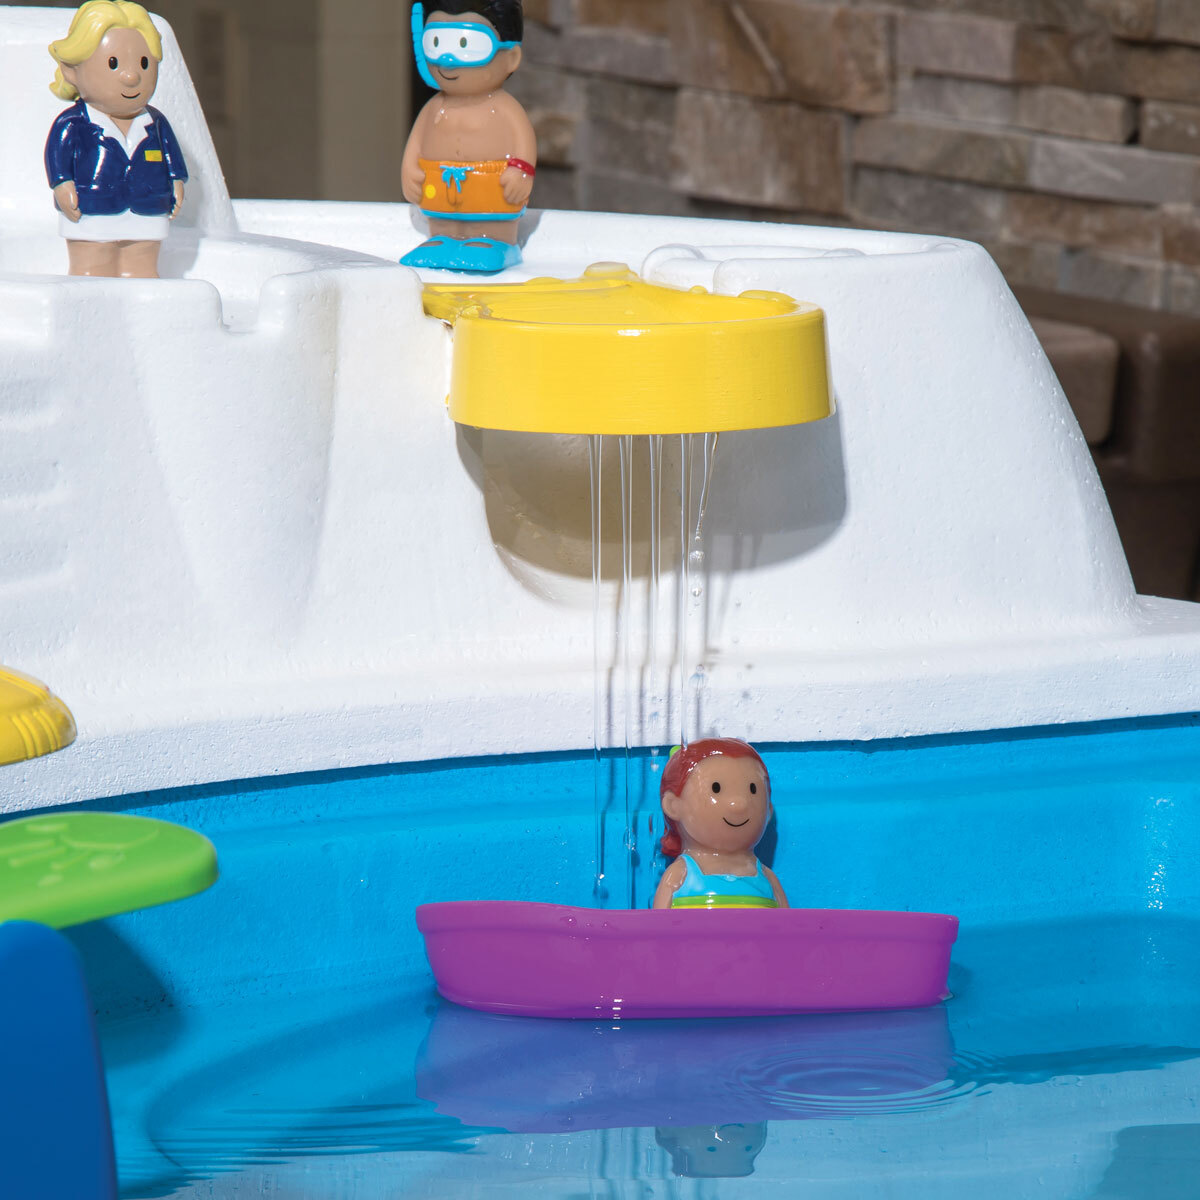 Buy Fiesta Cruise Sand & Water Summer Center Features6 Image at Costco.co.uk